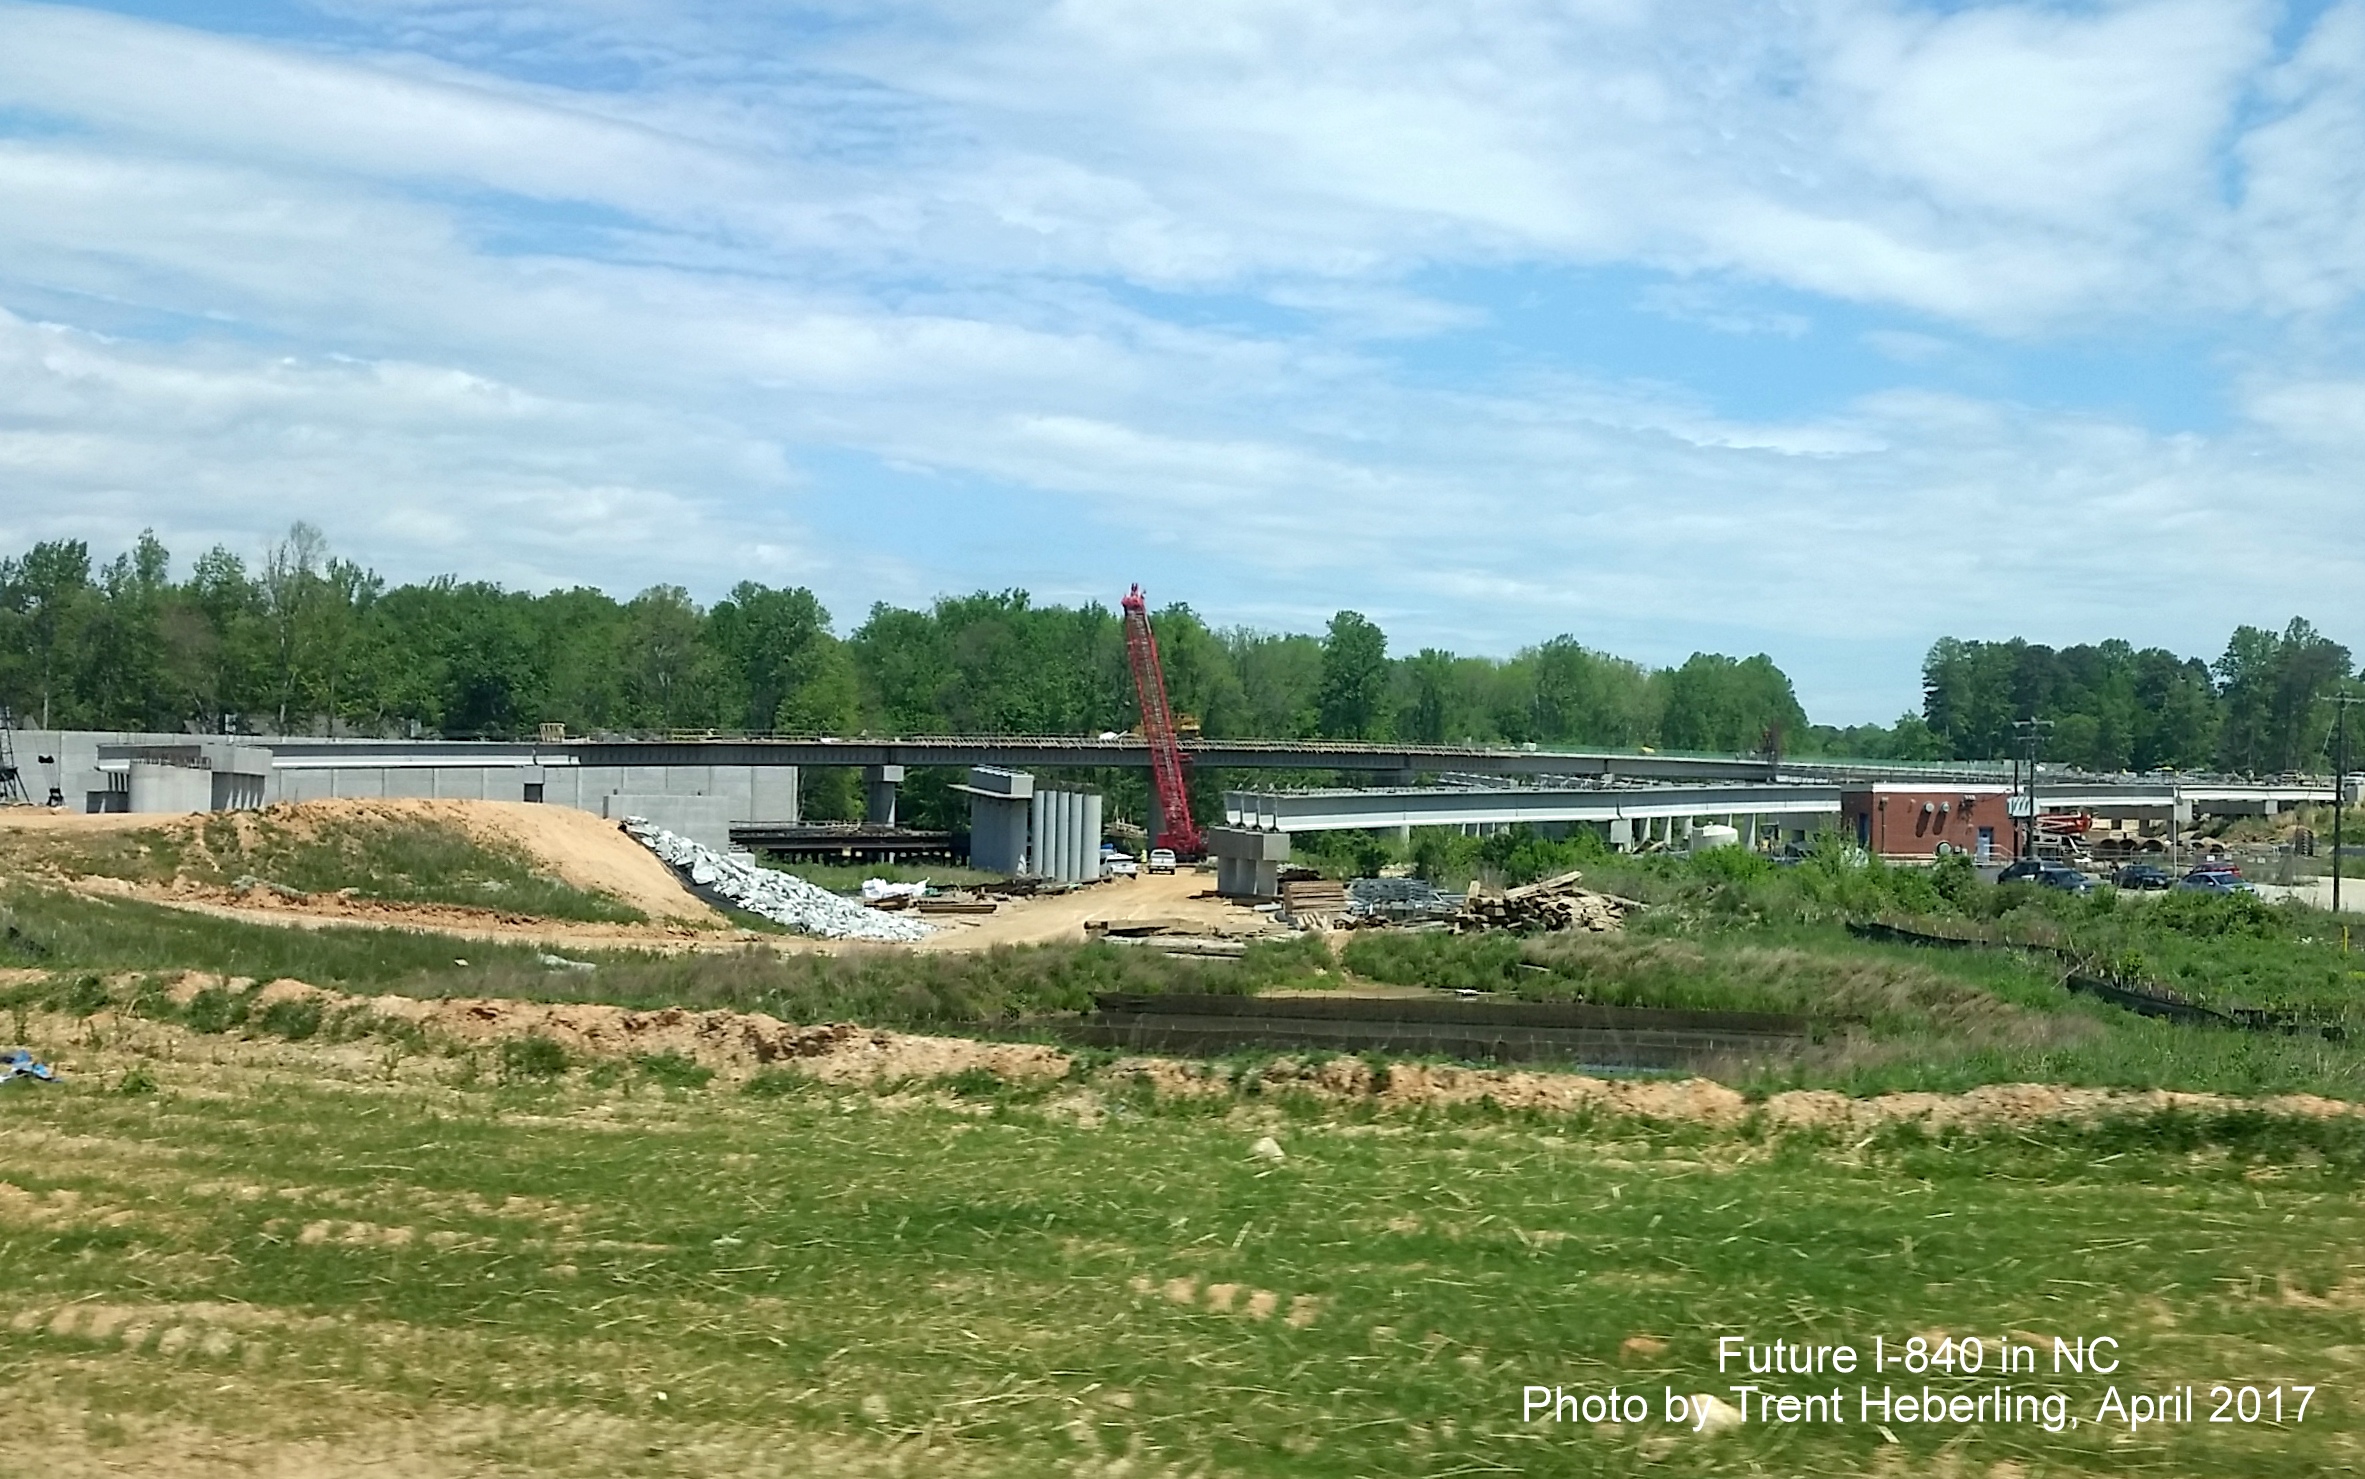 Image taken of Future I-840/Greensboro Loop under construction looking east from US 220/Battleground Ave, by Trent Heberling